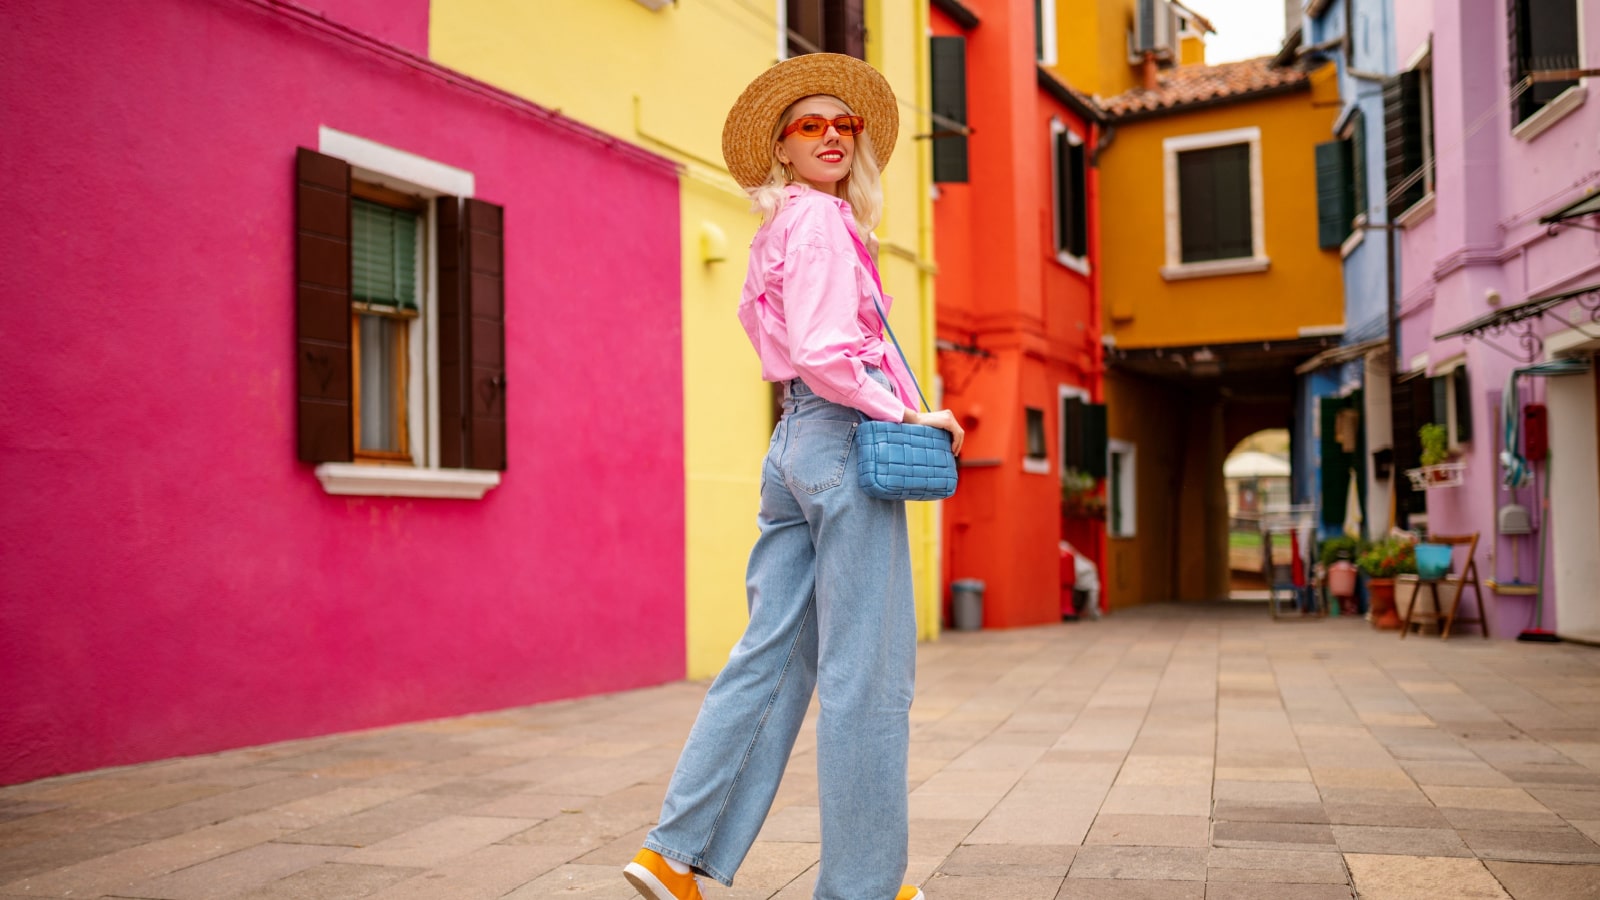 Happy smiling female traveler wearing stylish hat, glasses, pink shirt, wide leg trousers, walking, posing near colorful houses in street. Travel, tourism, vacation, fashion, lifestyle conception